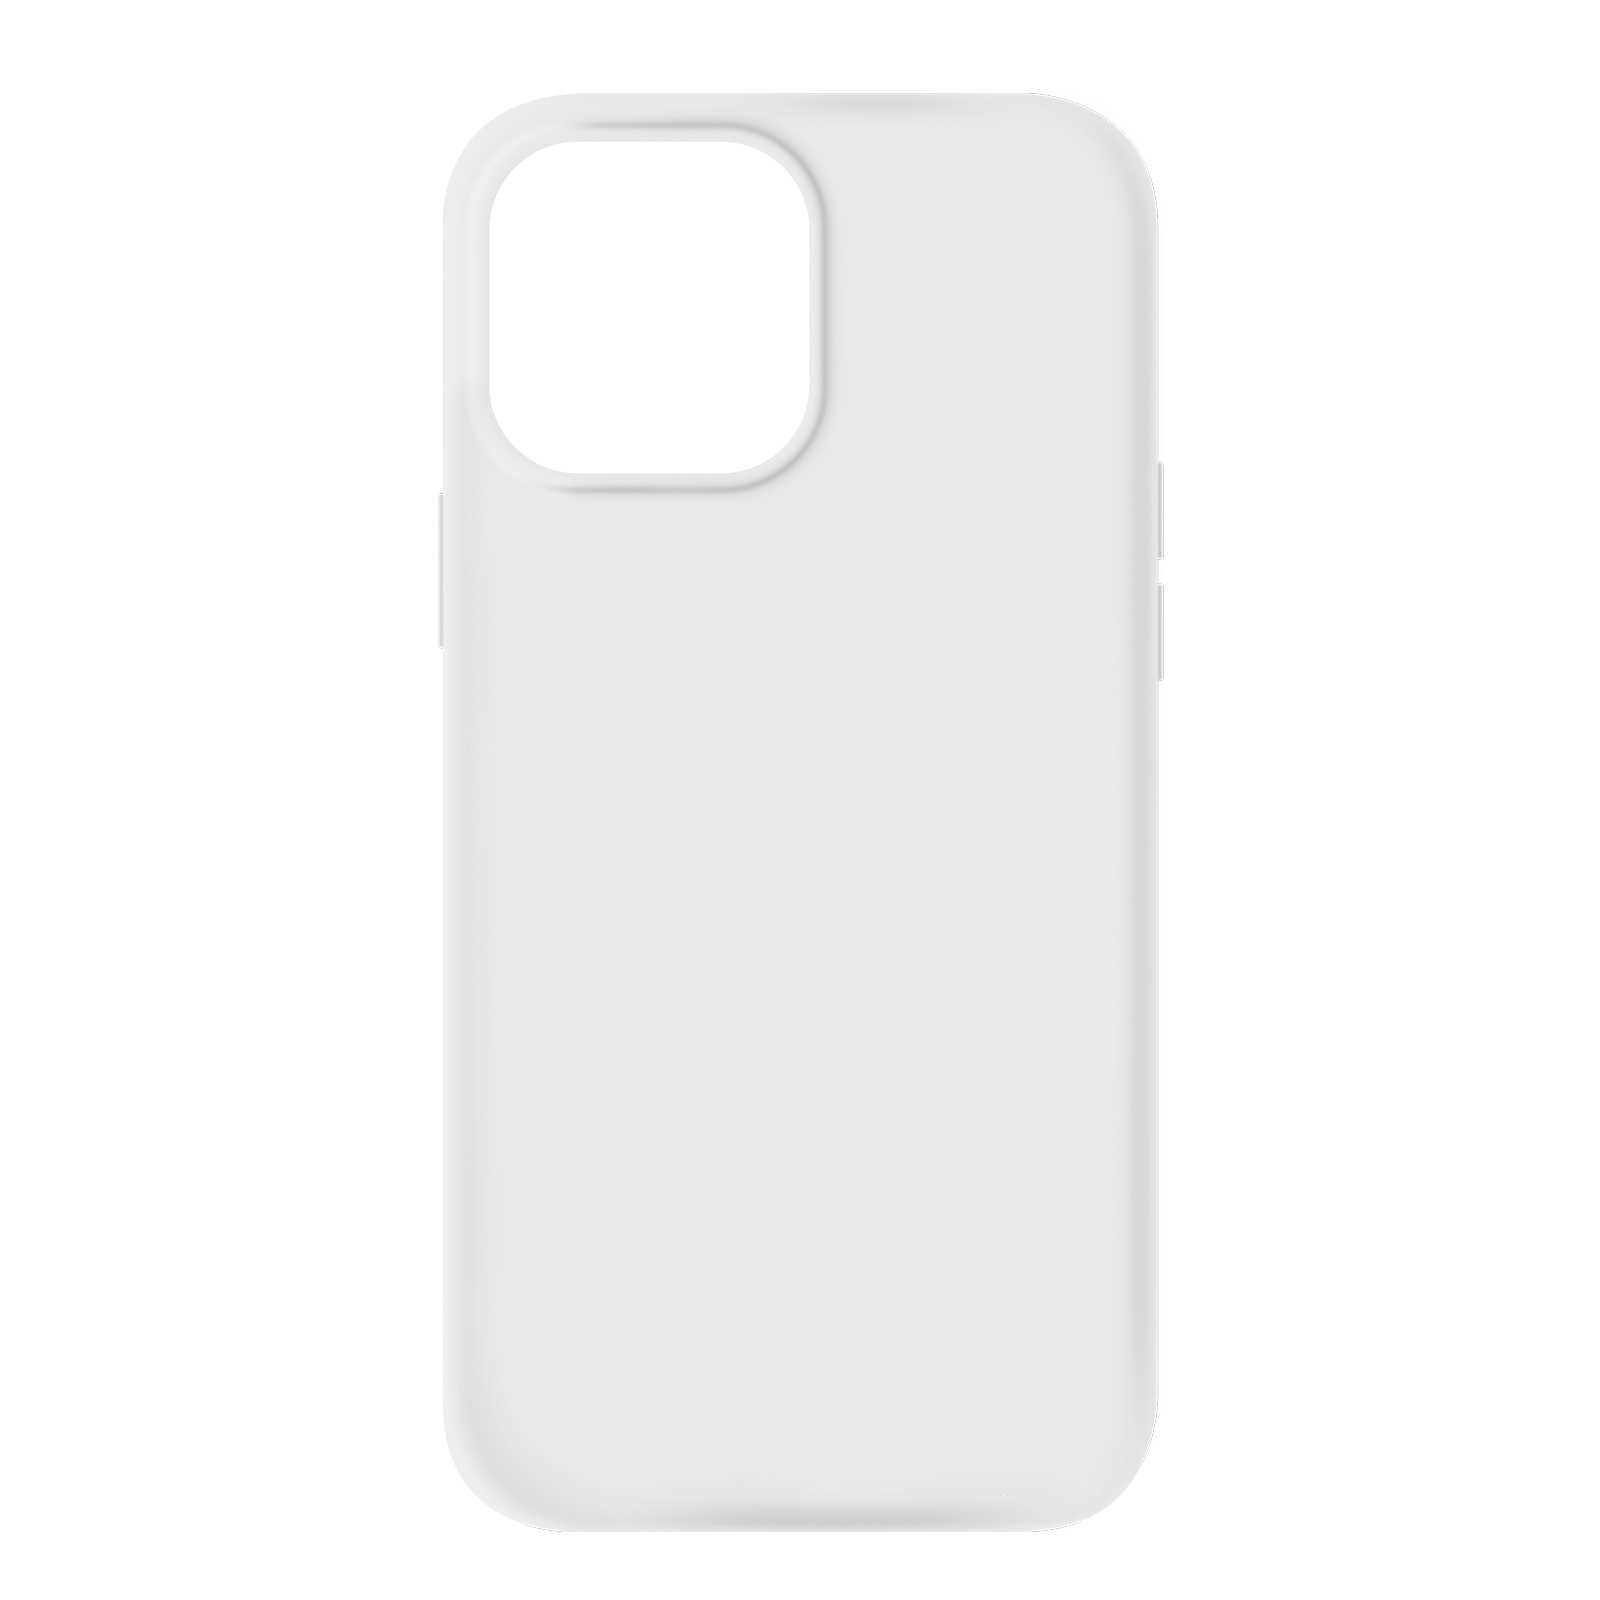 13 iPhone Weiß Likid AVIZAR Apple, Backcover, Pro Series, Max,